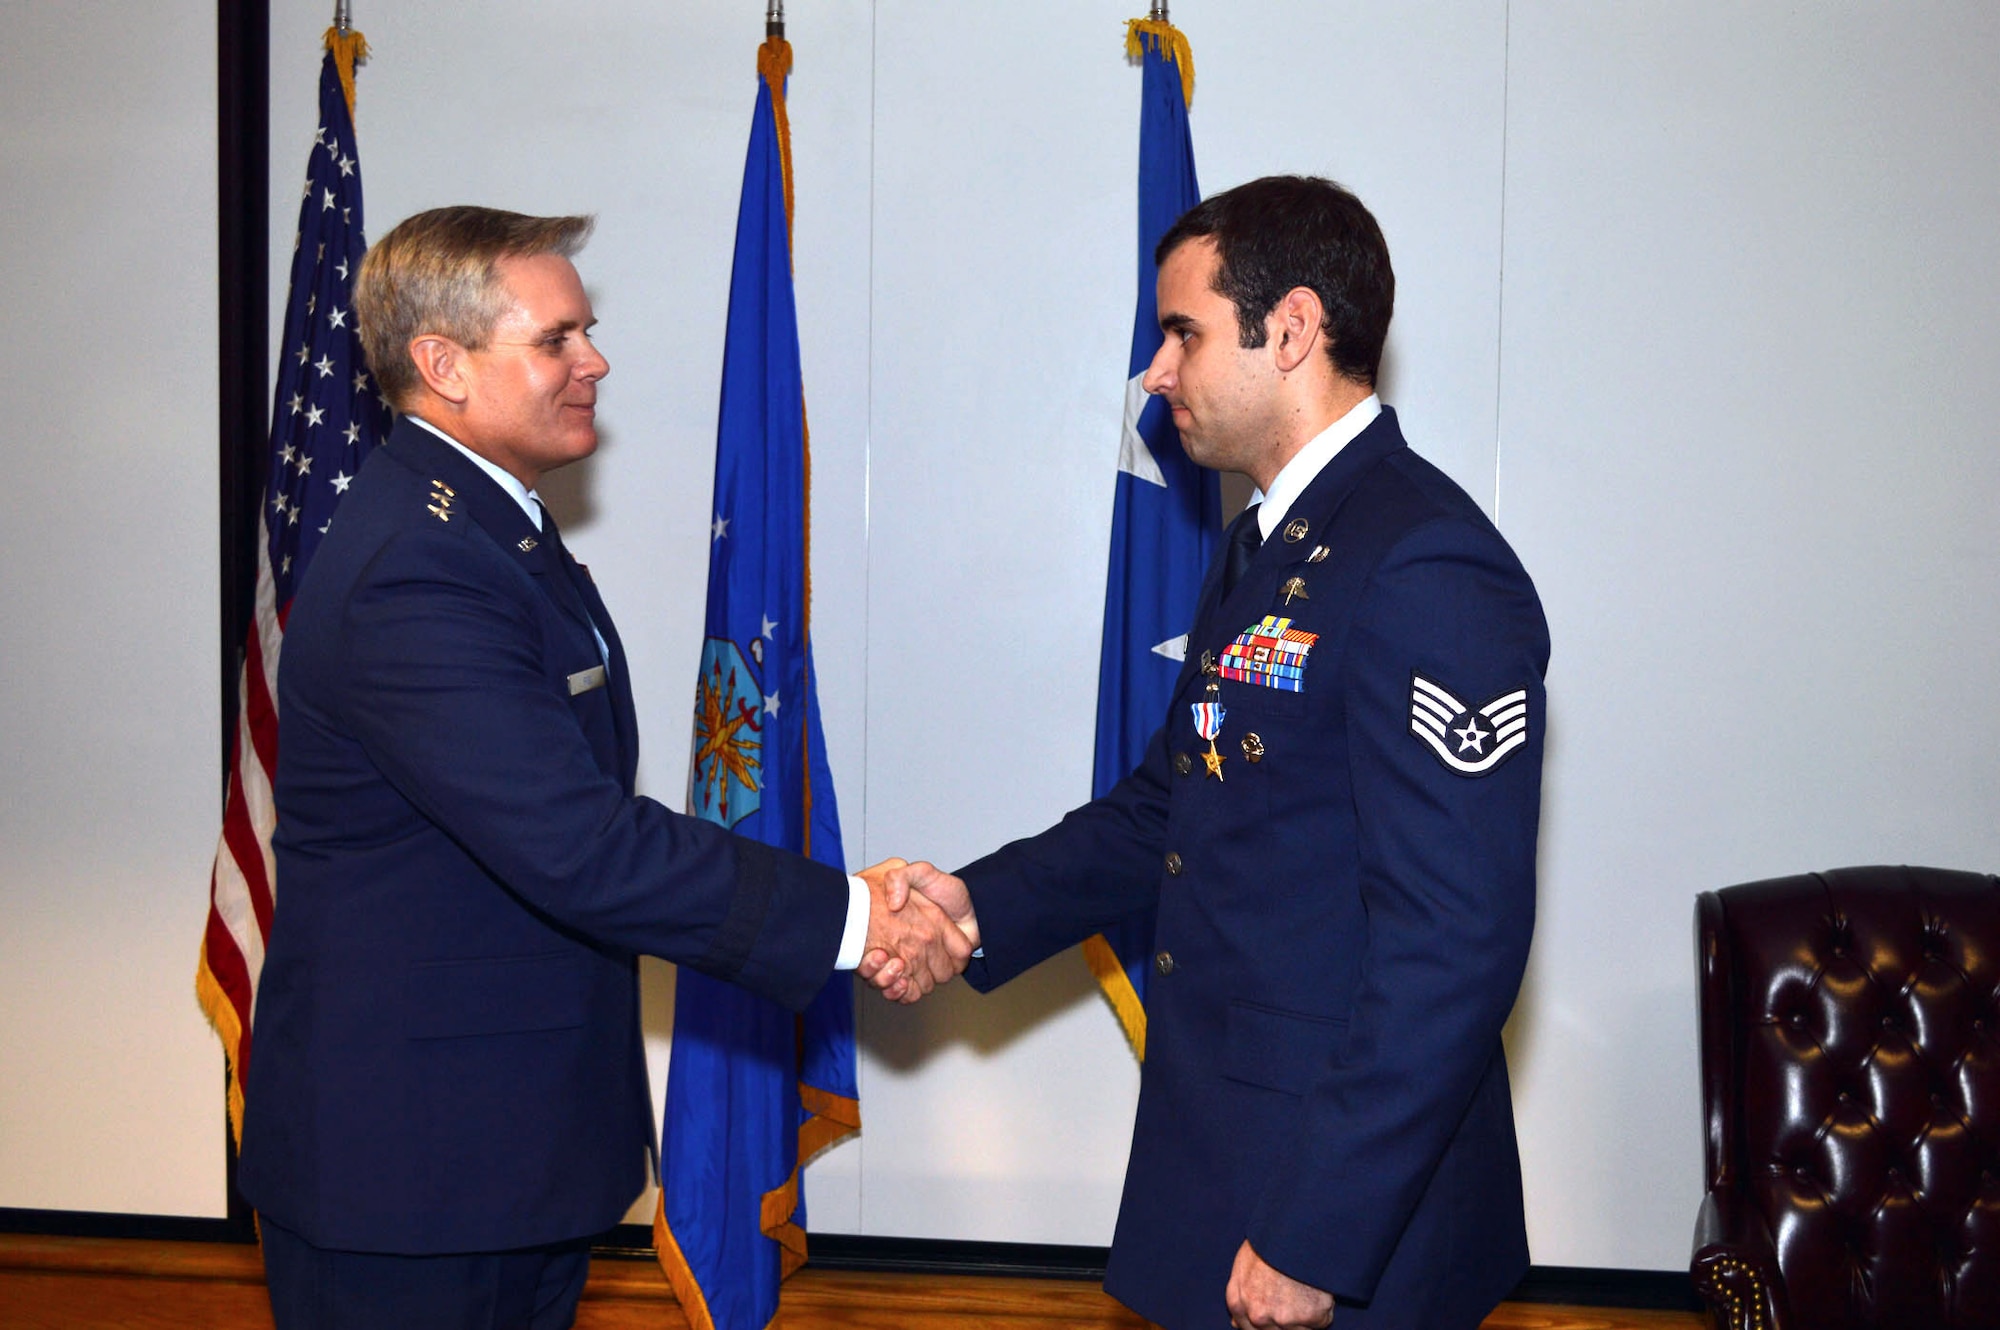 Lt. Gen. Eric Fiel, Air Force Special Operations Command commander, awards the Silver Star medal to Staff Sgt. Christopher Baradat, 21st Special Tactics Squadron, Jan. 10, 2014, Pope Army Airfield, Fort Bragg, N.C., for heroically distinguishing himself by gallantry in connection with military operations against an armed enemy of the United States in Sono Valley, Sheltan District, Kunar Province, Afghanistan, April 6, 2013. (U.S. Air Force photo by Marvin Krause)